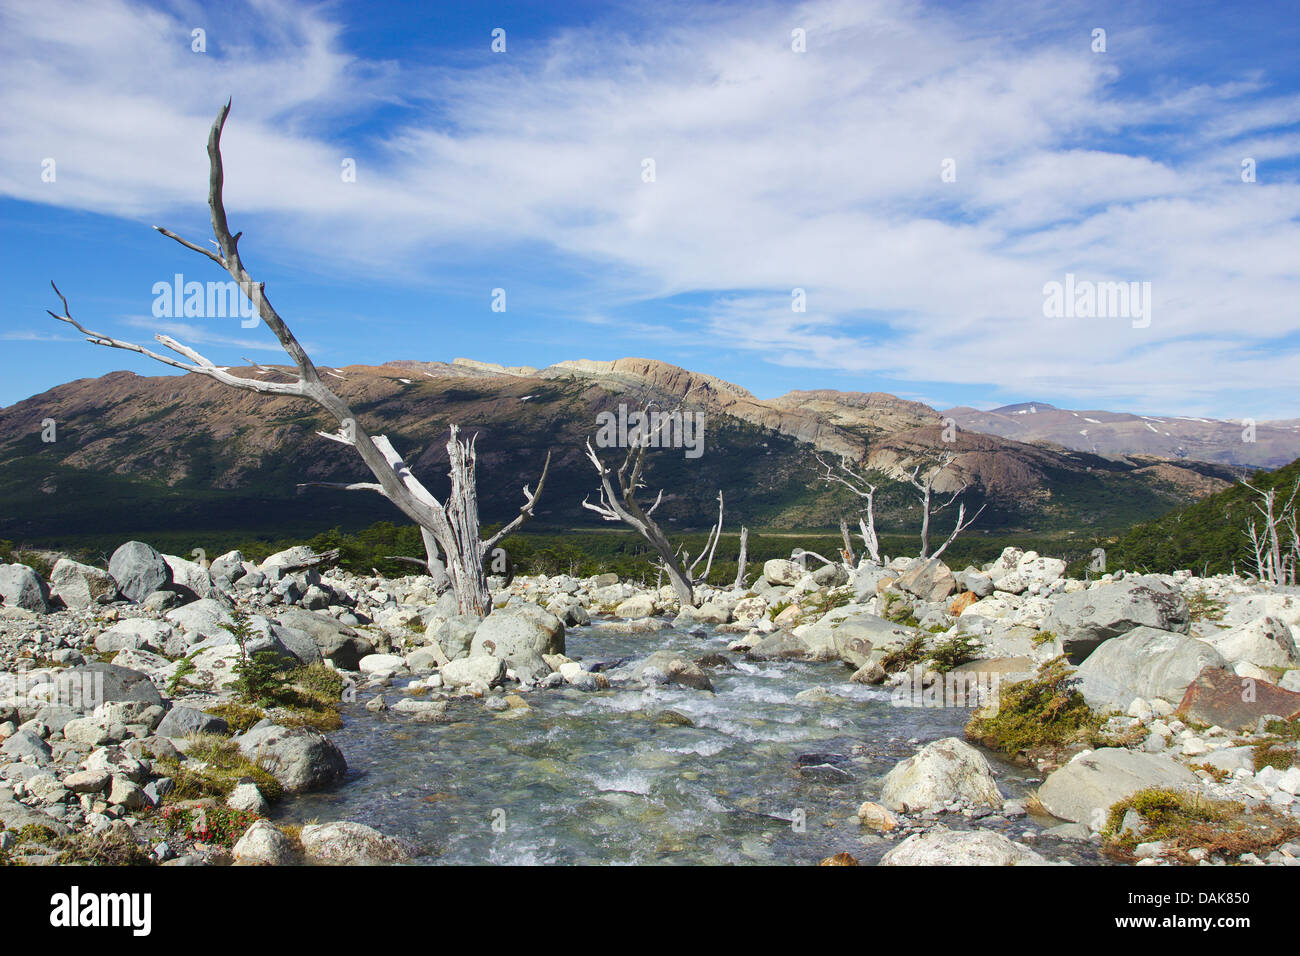 dead trees on alluvial fan, Argentina, Patagonia, Andes, Los Glaciares National Park Stock Photo